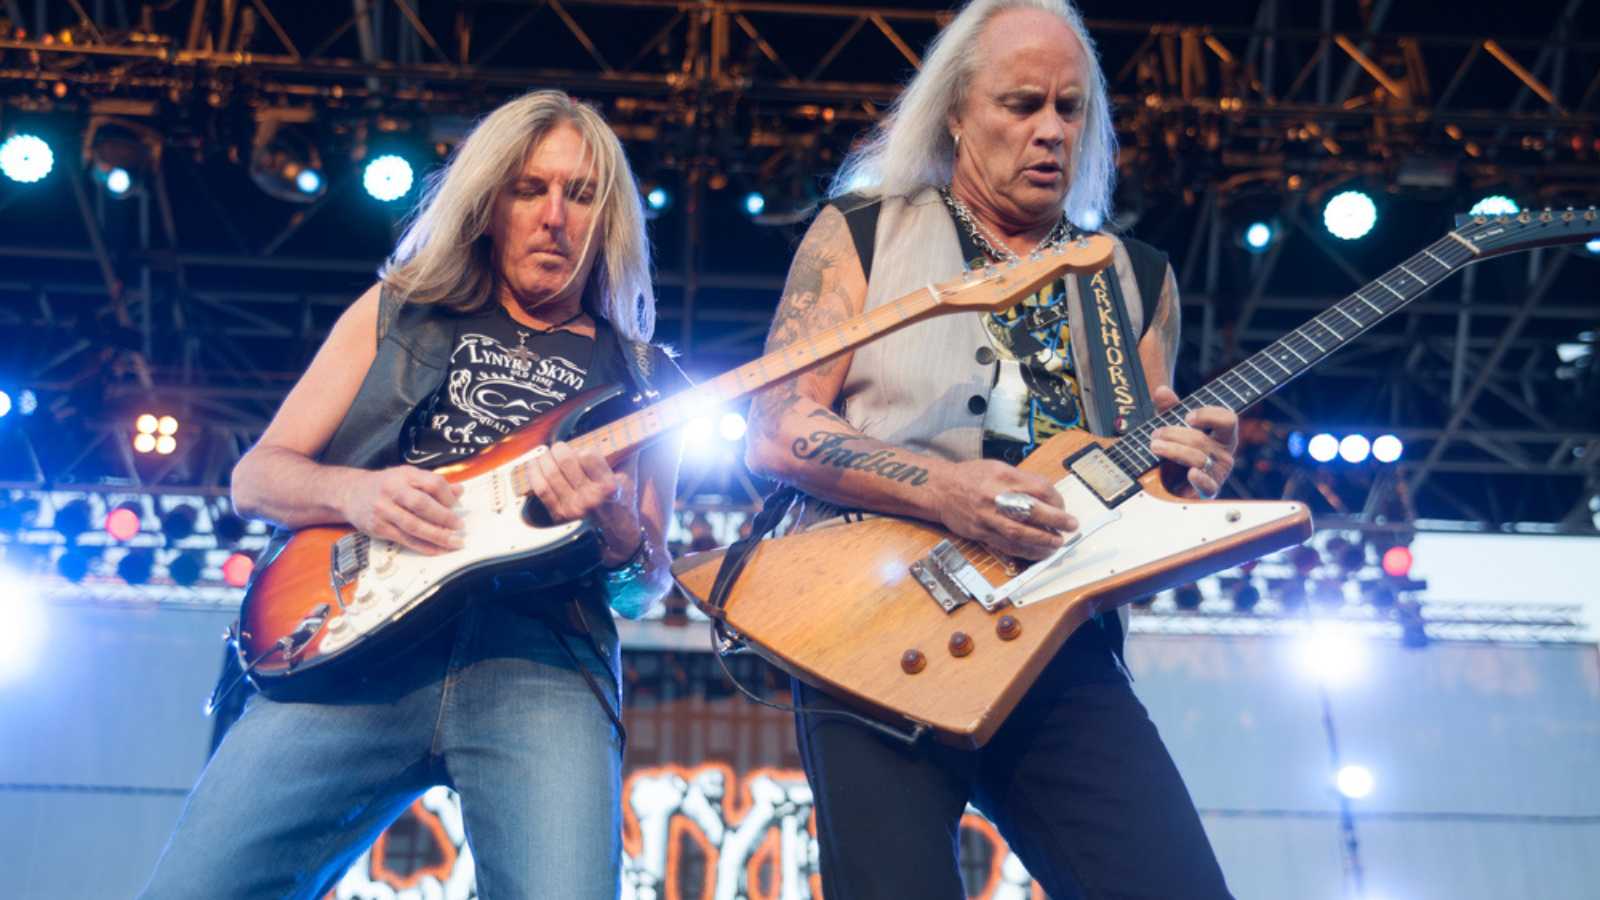 LINCOLN, CA - June 22: Lynyrd Skynyrd performs at Thunder Valley Casino and Resort in Lincoln, California on June 22, 2013
